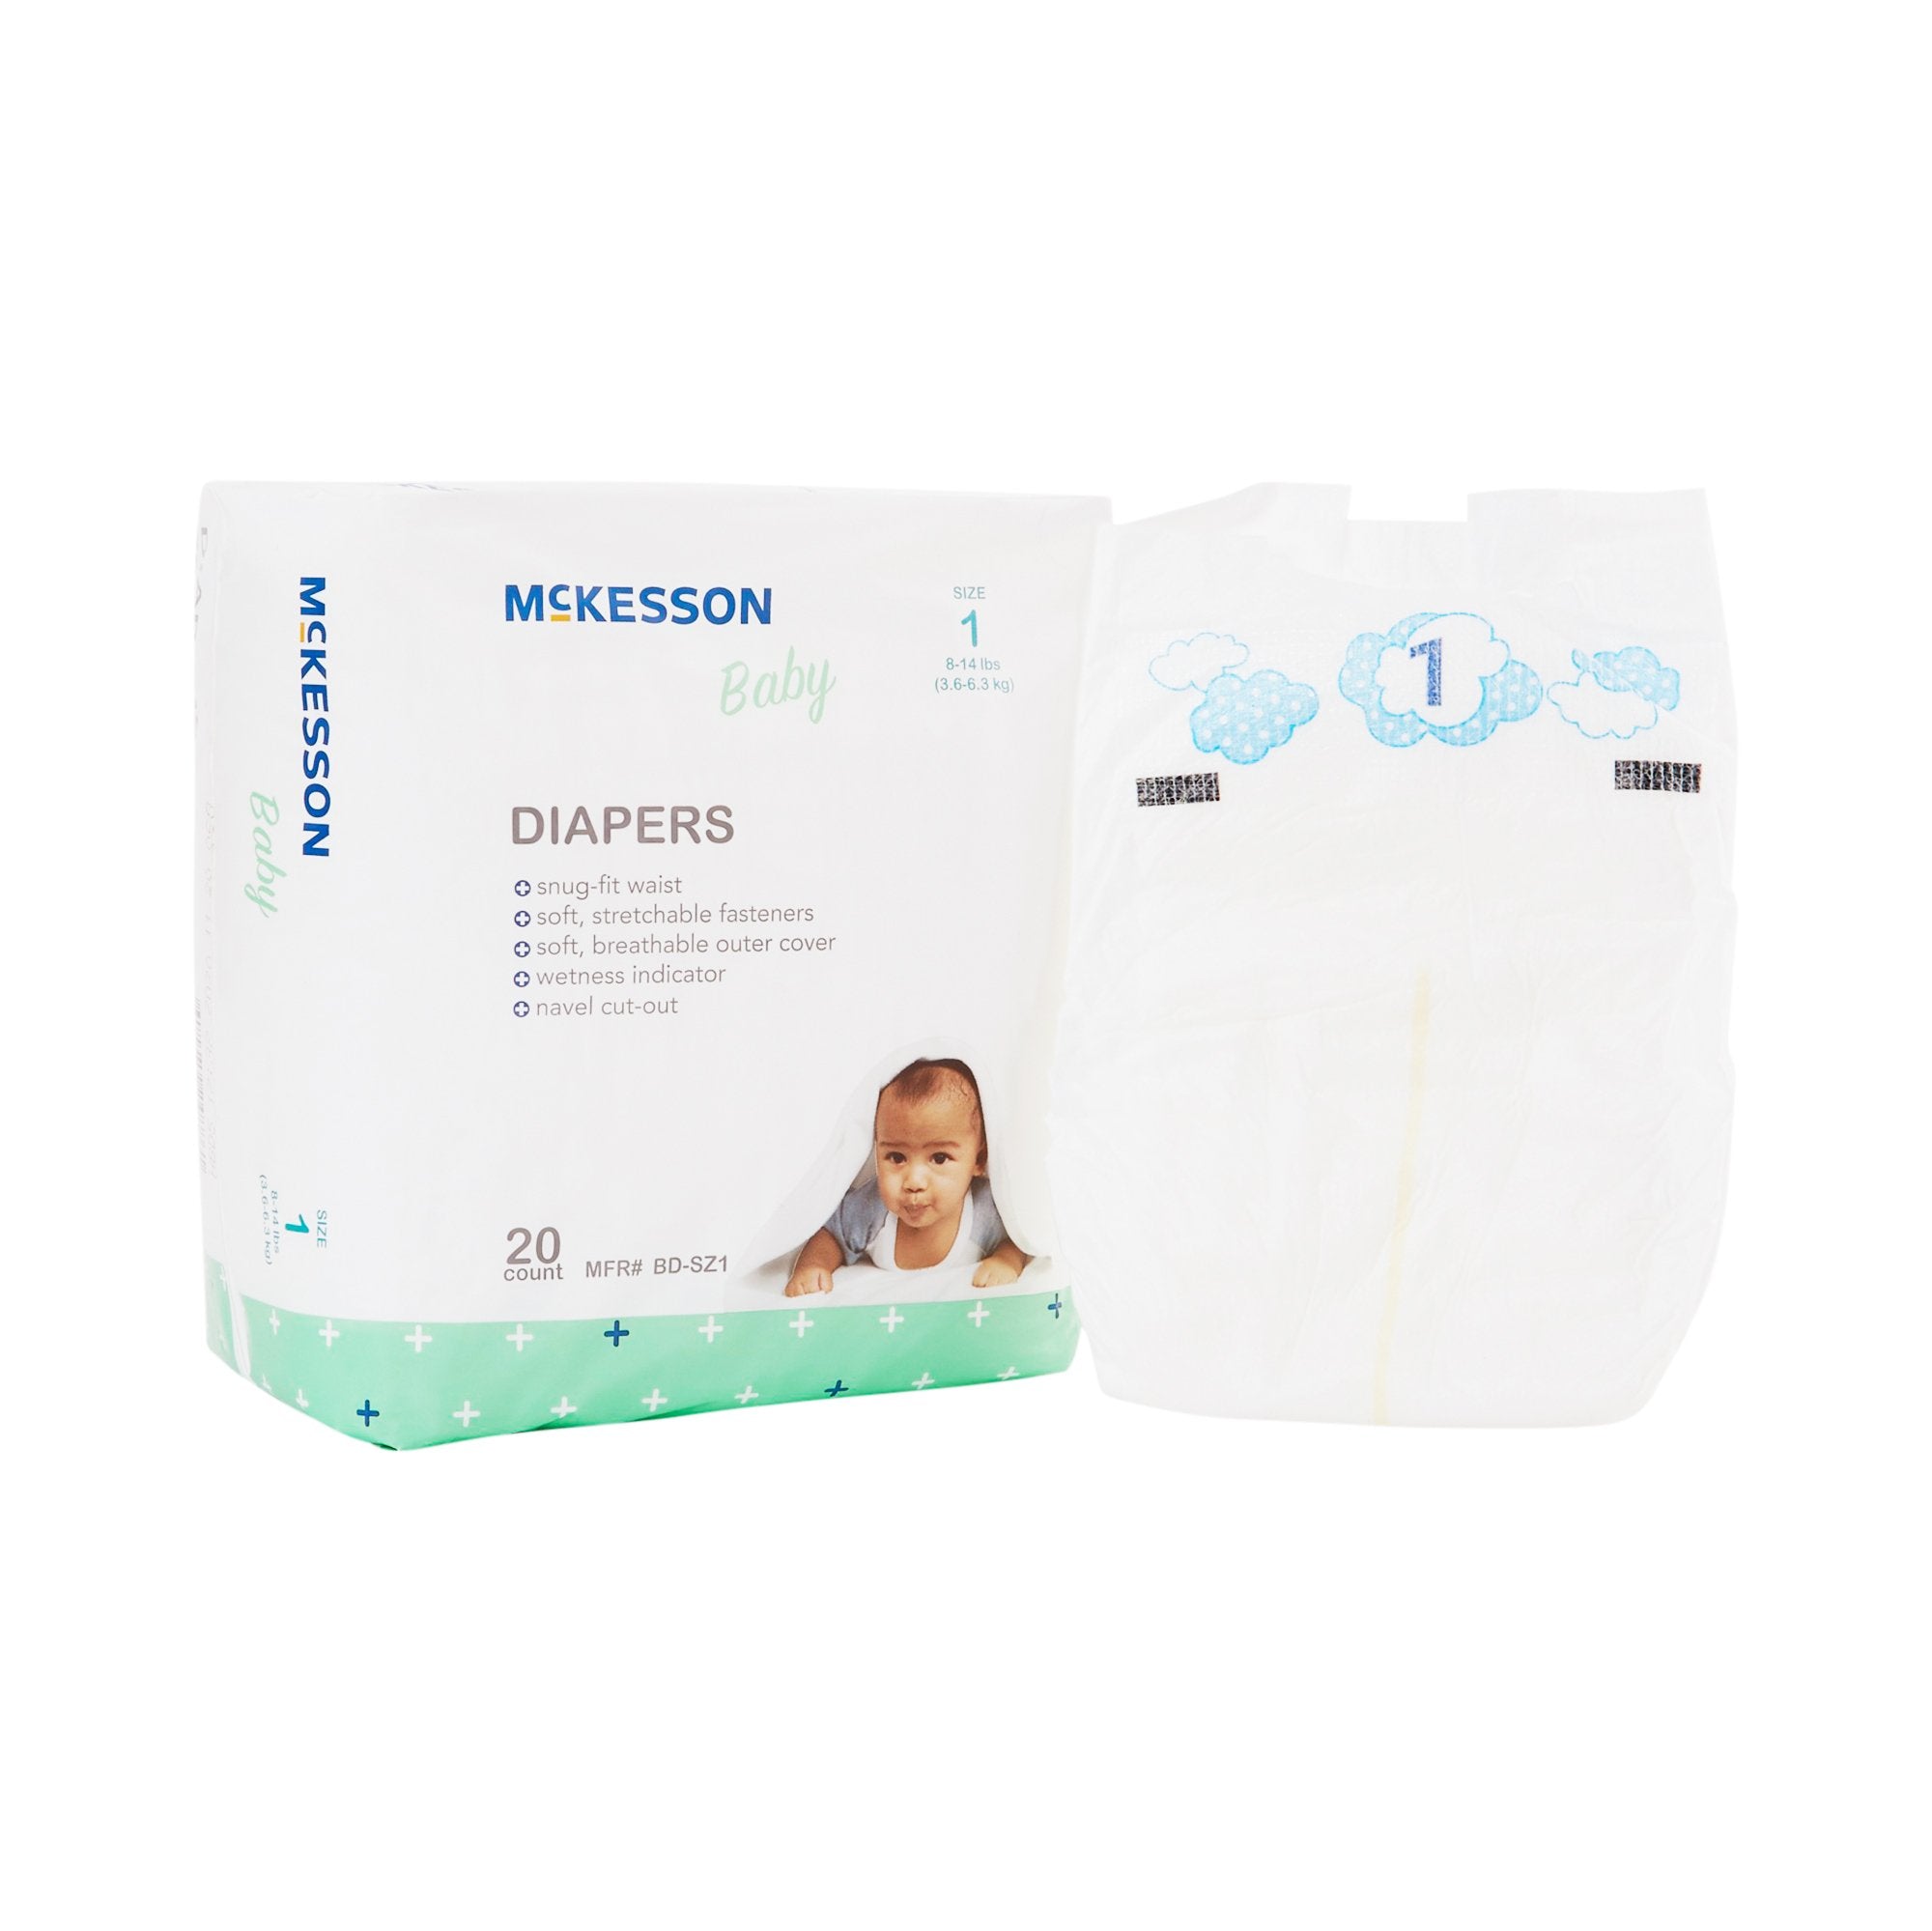 Unisex Baby Diaper McKesson Size 1 Disposable Moderate Absorbency